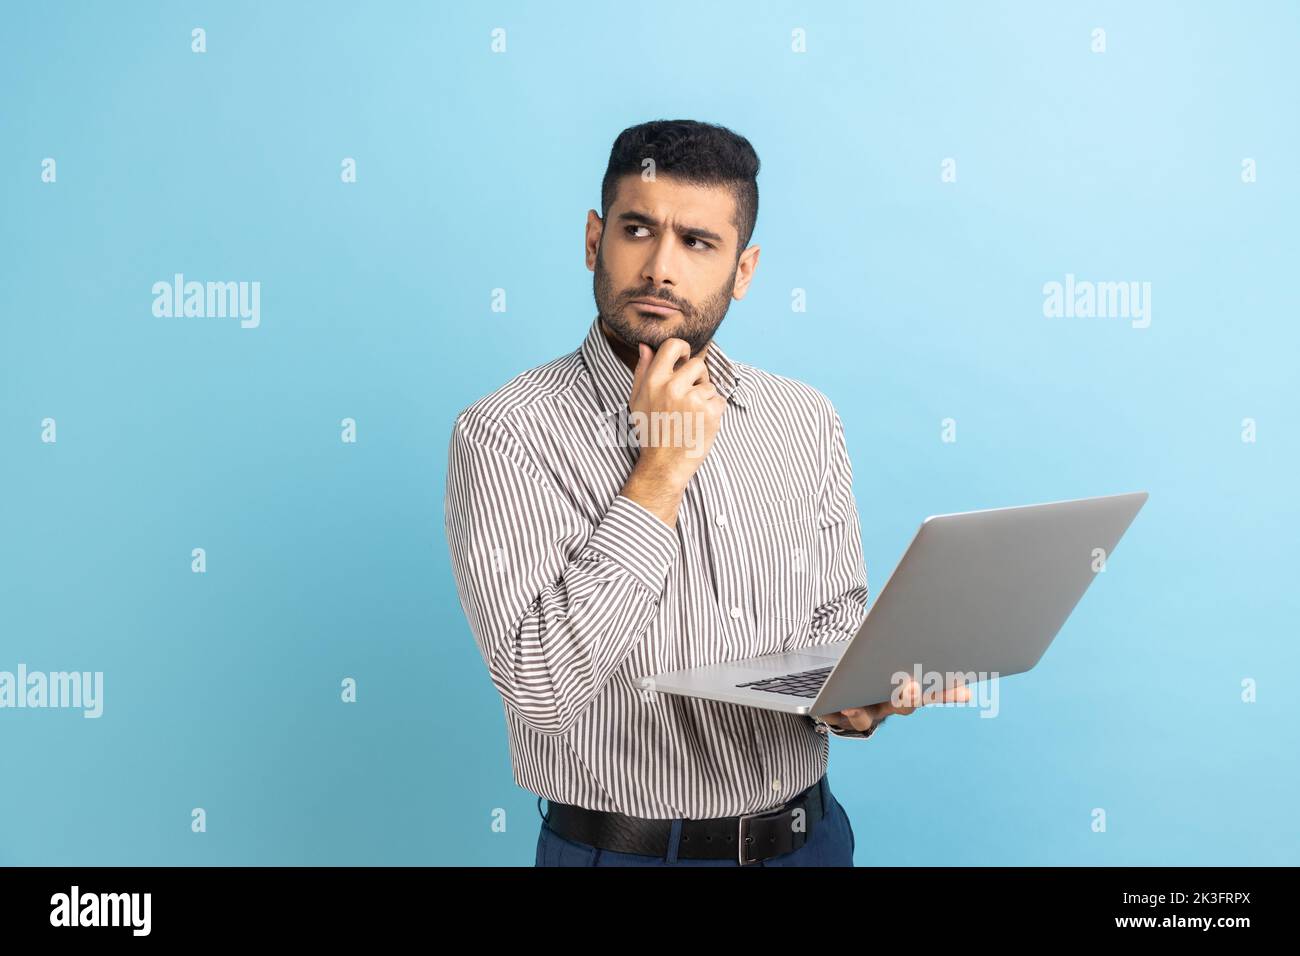 Portrait thoughtful pensive man with beard holding laptop and holding chin looking away, thinking over new business project, wearing striped shirt. Indoor studio shot isolated on blue background. Stock Photo